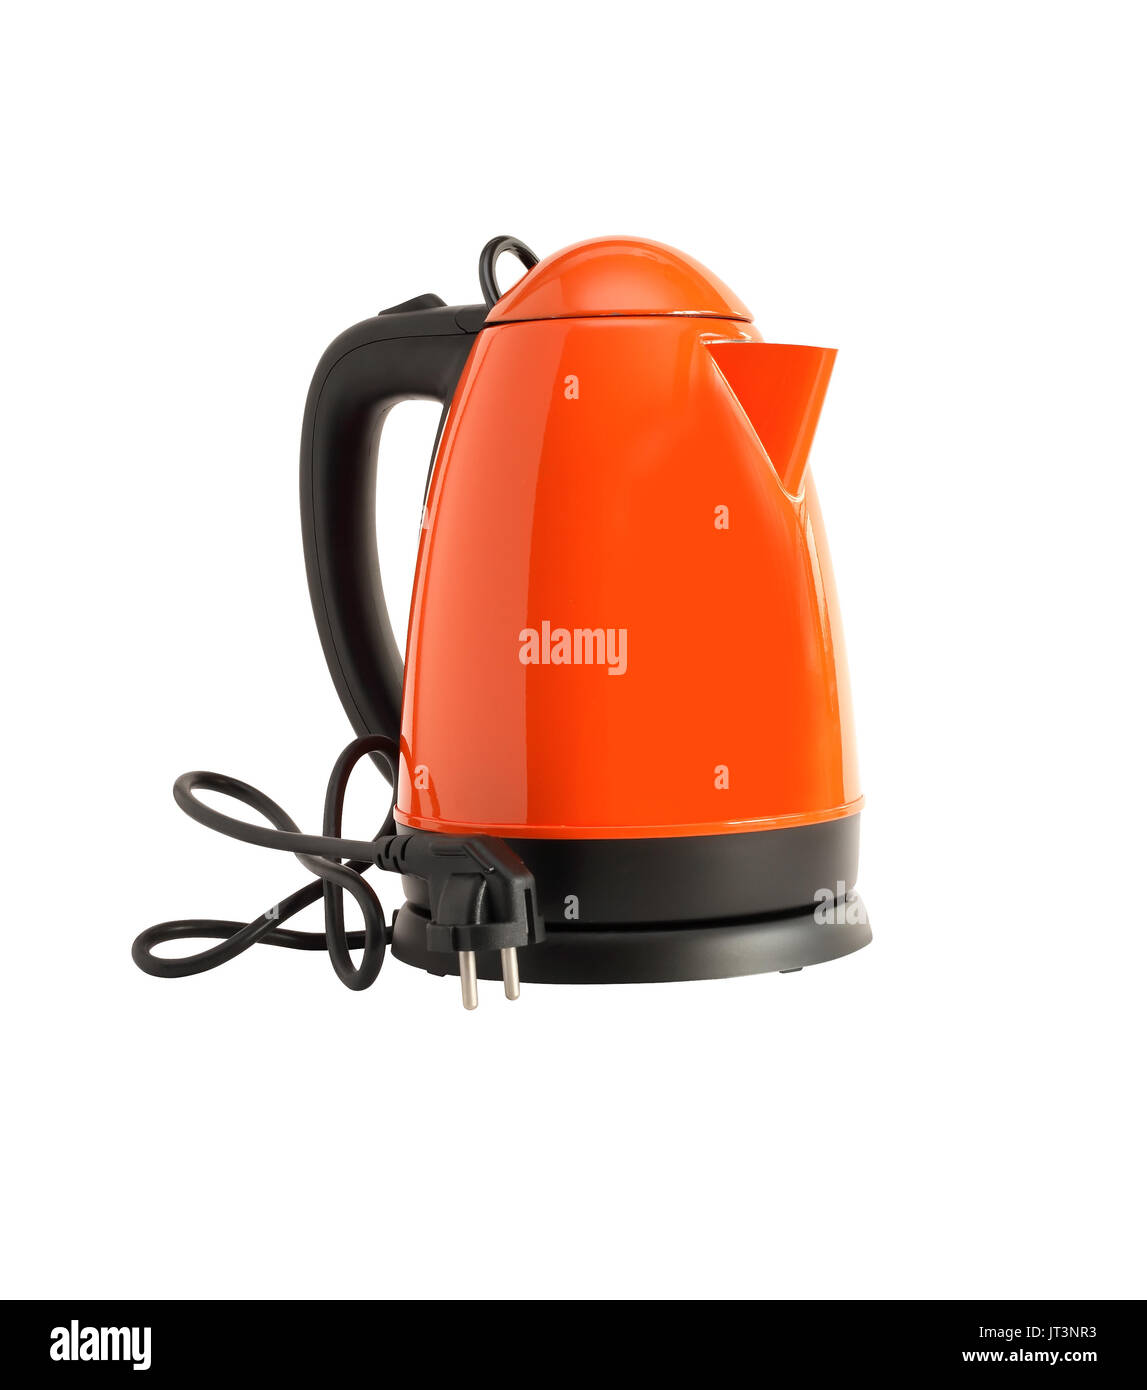 https://c8.alamy.com/comp/JT3NR3/modern-new-electric-kettle-on-white-background-isolated-with-clipping-JT3NR3.jpg